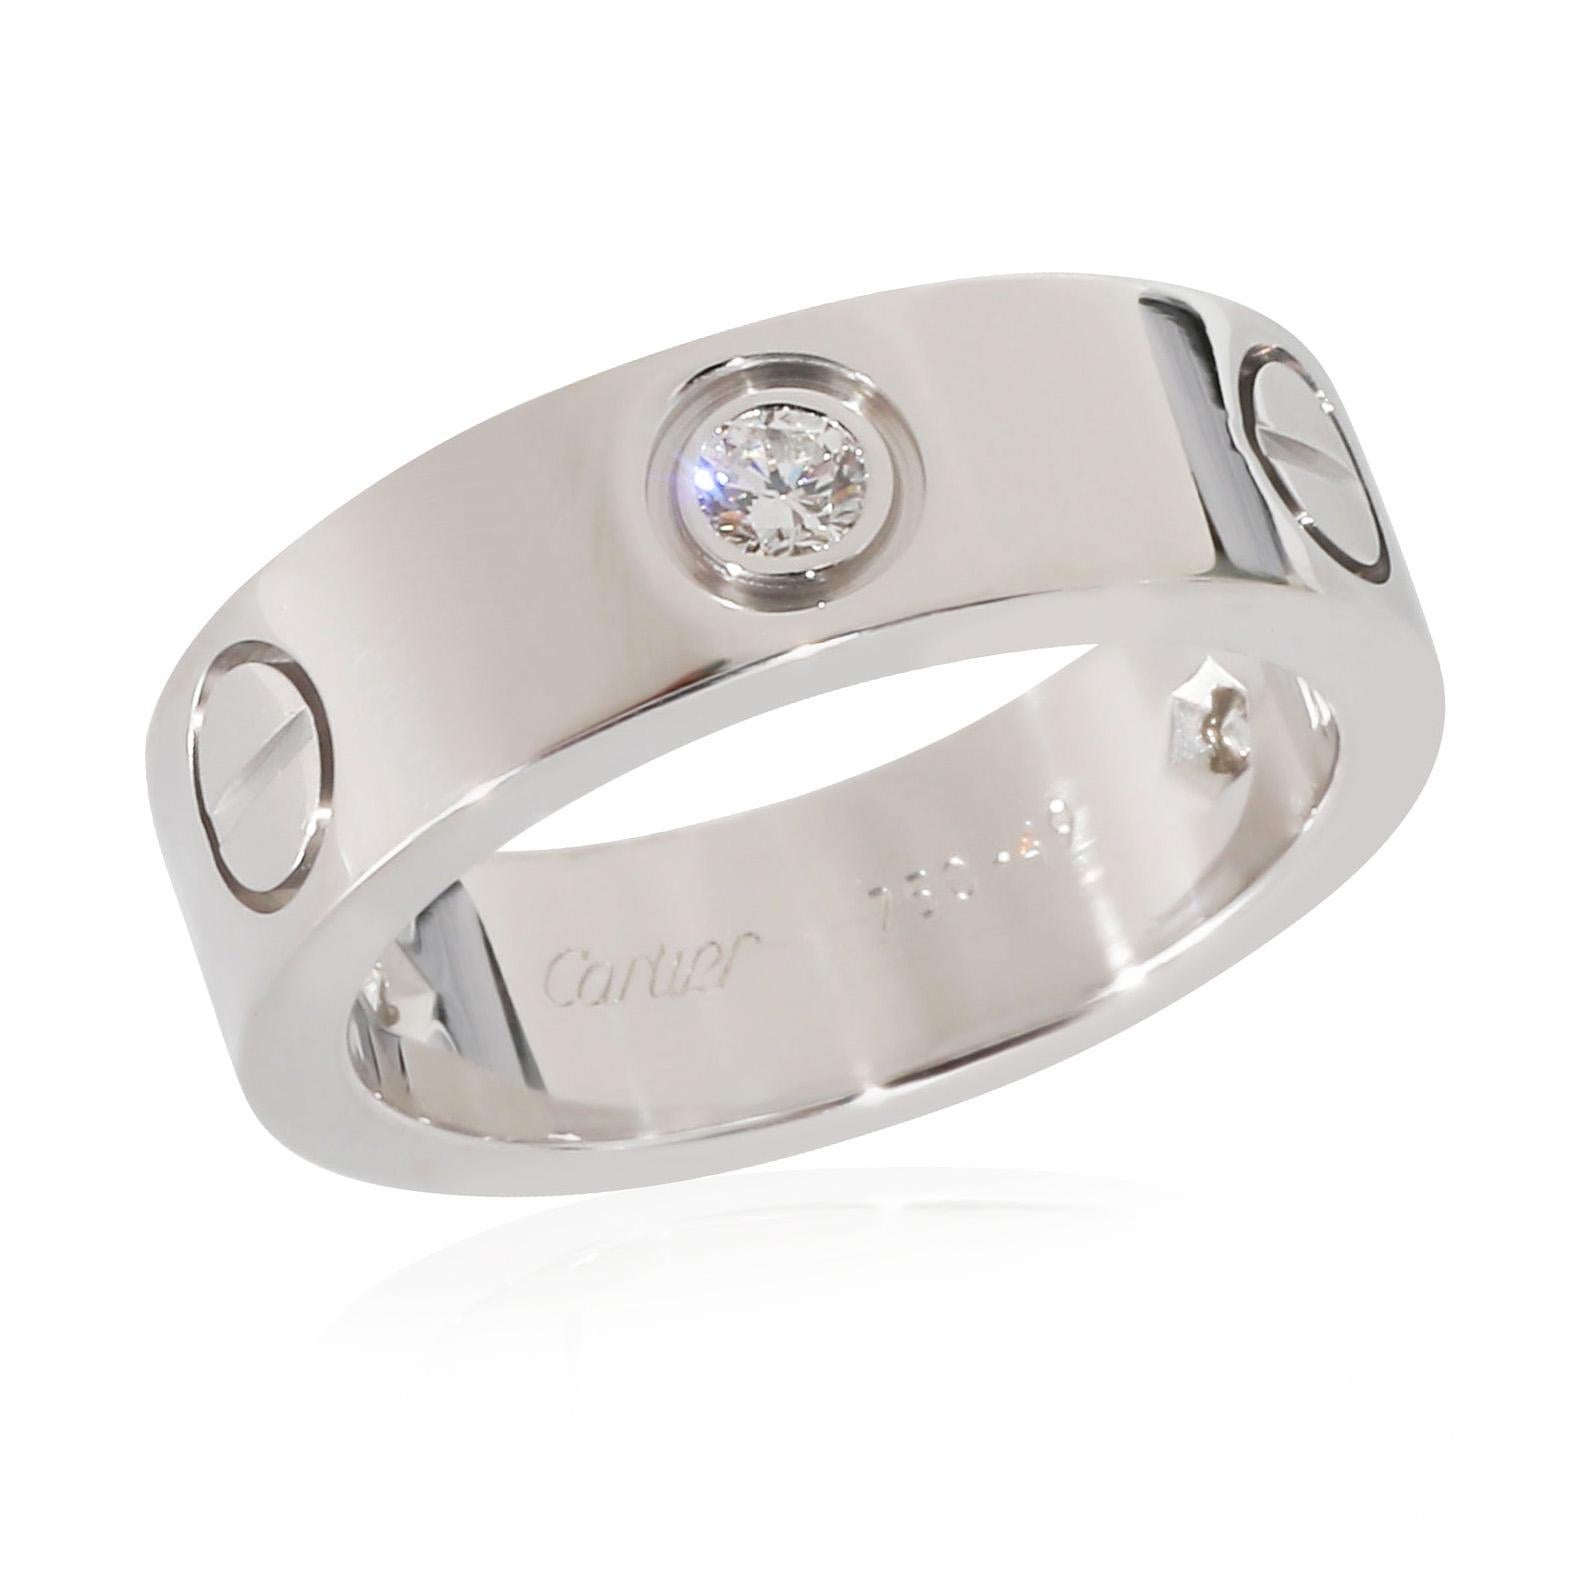 Cartier Love Ring in 18k White Gold 0.22 CTW In Excellent Condition For Sale In New York, NY